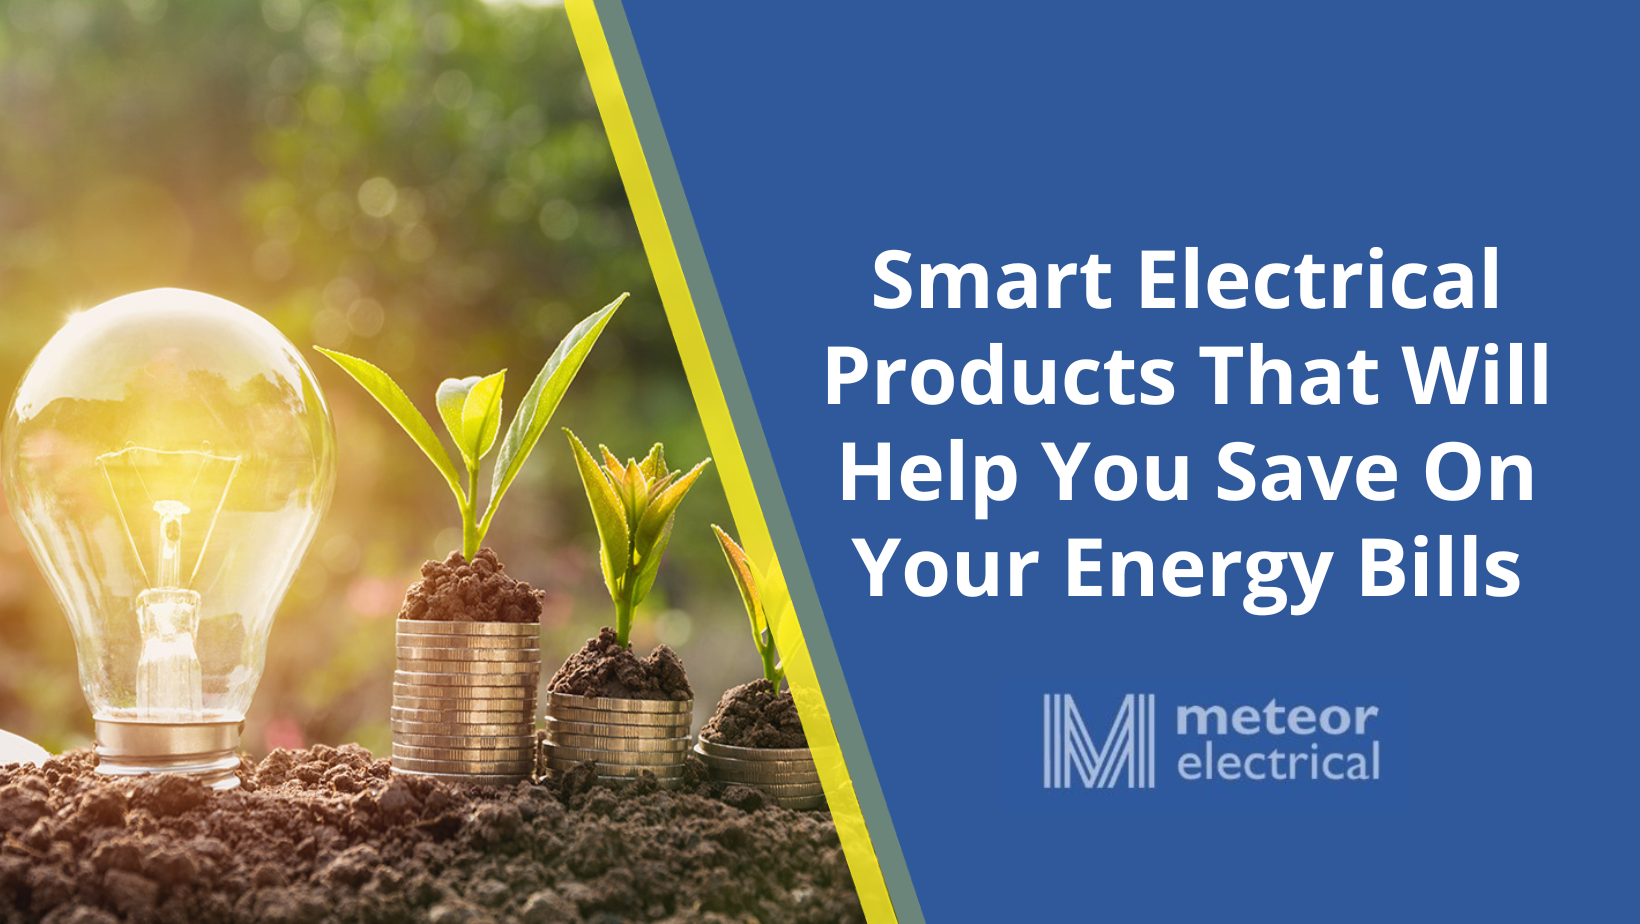 Smart Electrical Products That Will Help You Save On Your Energy Bills